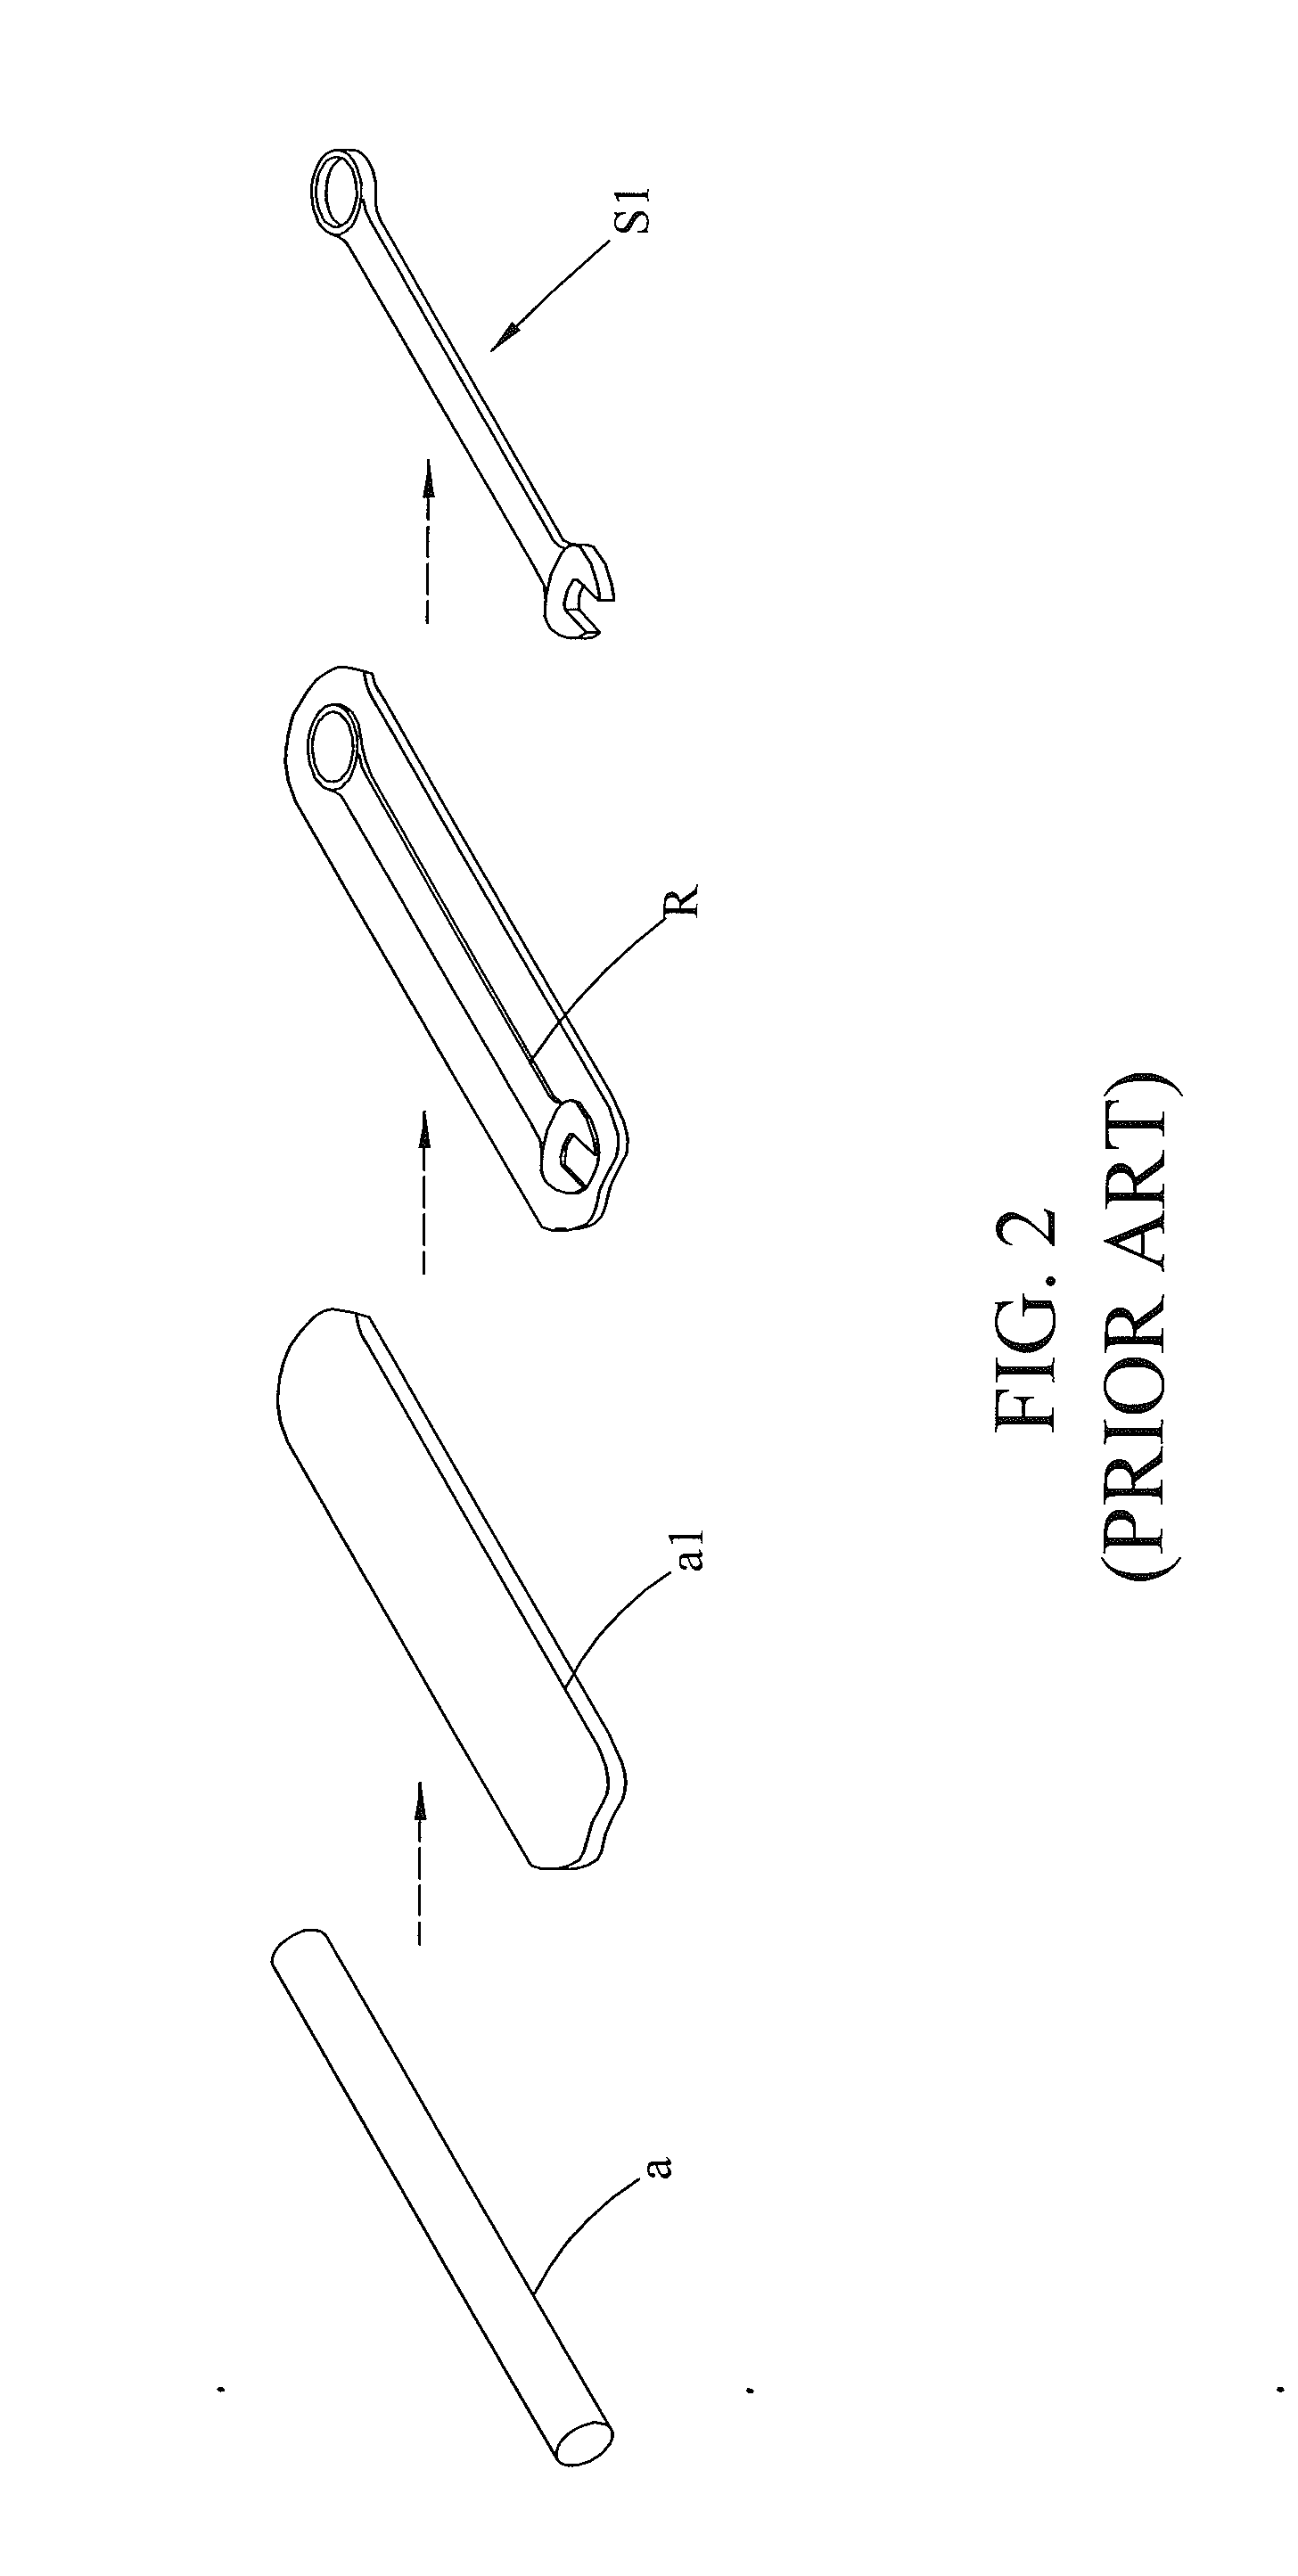 Method of Making a Spanner